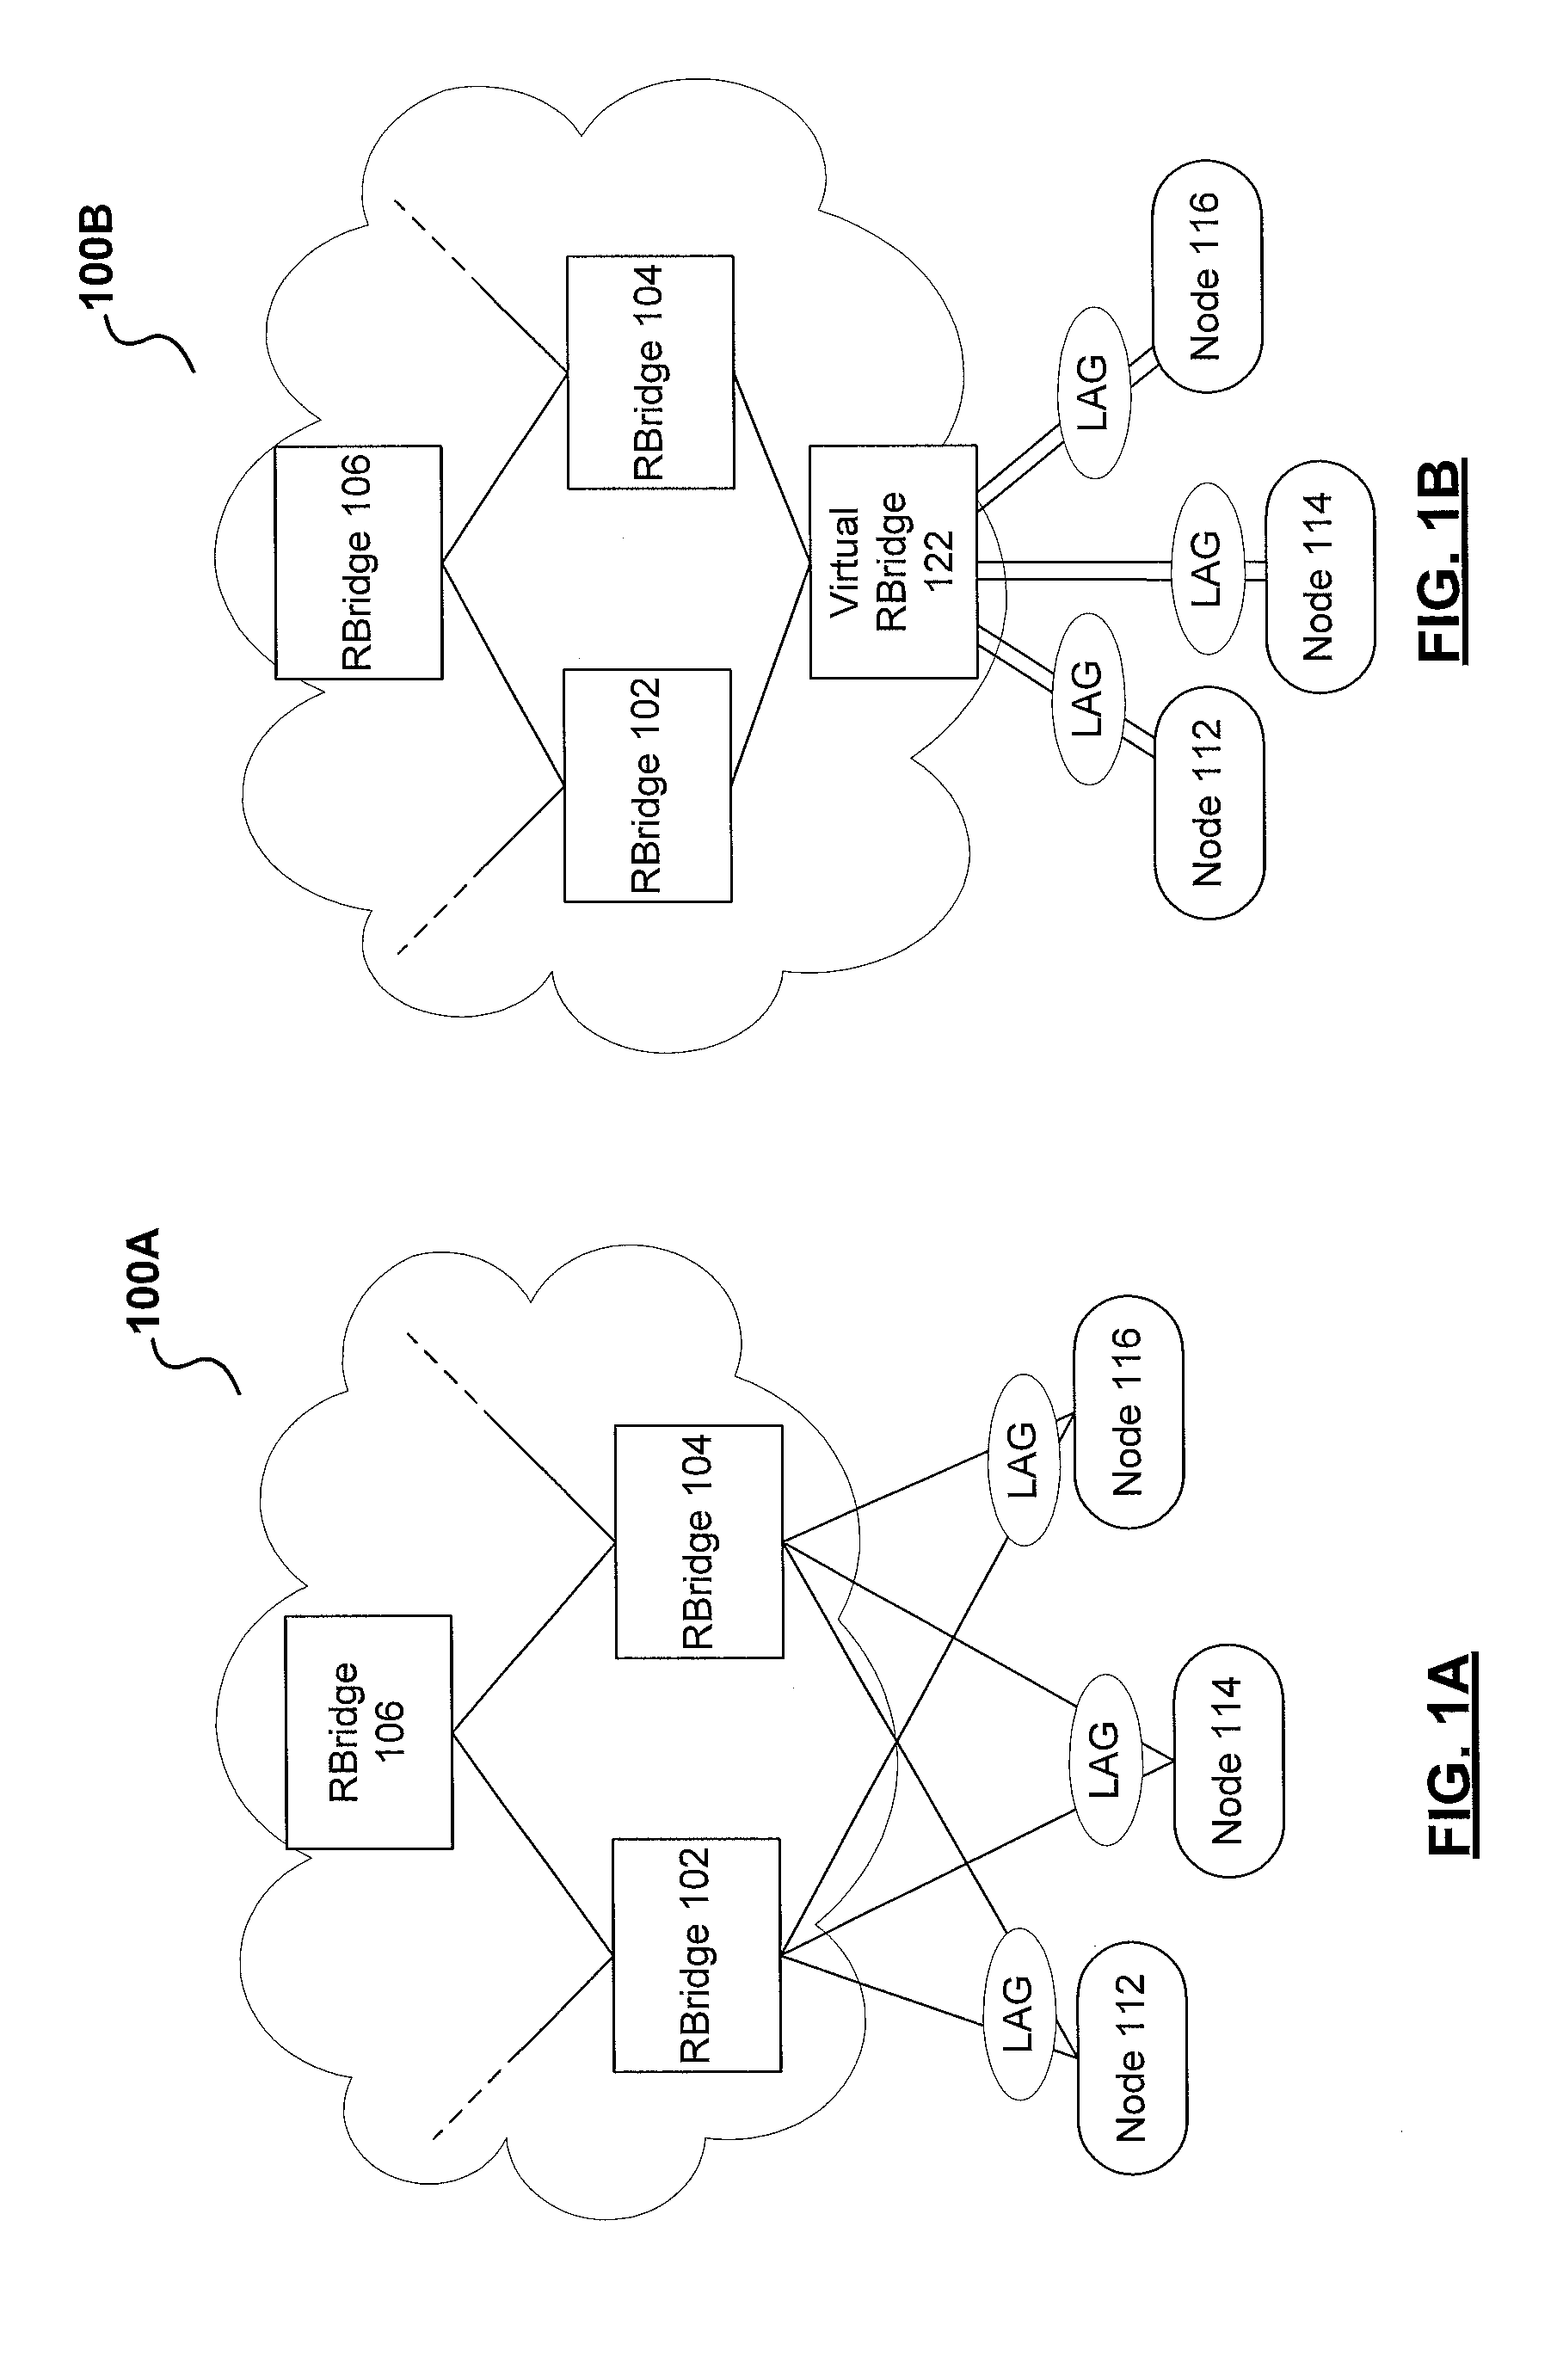 Systems and methods providing reverse path forwarding compliance for a multihoming virtual routing bridge